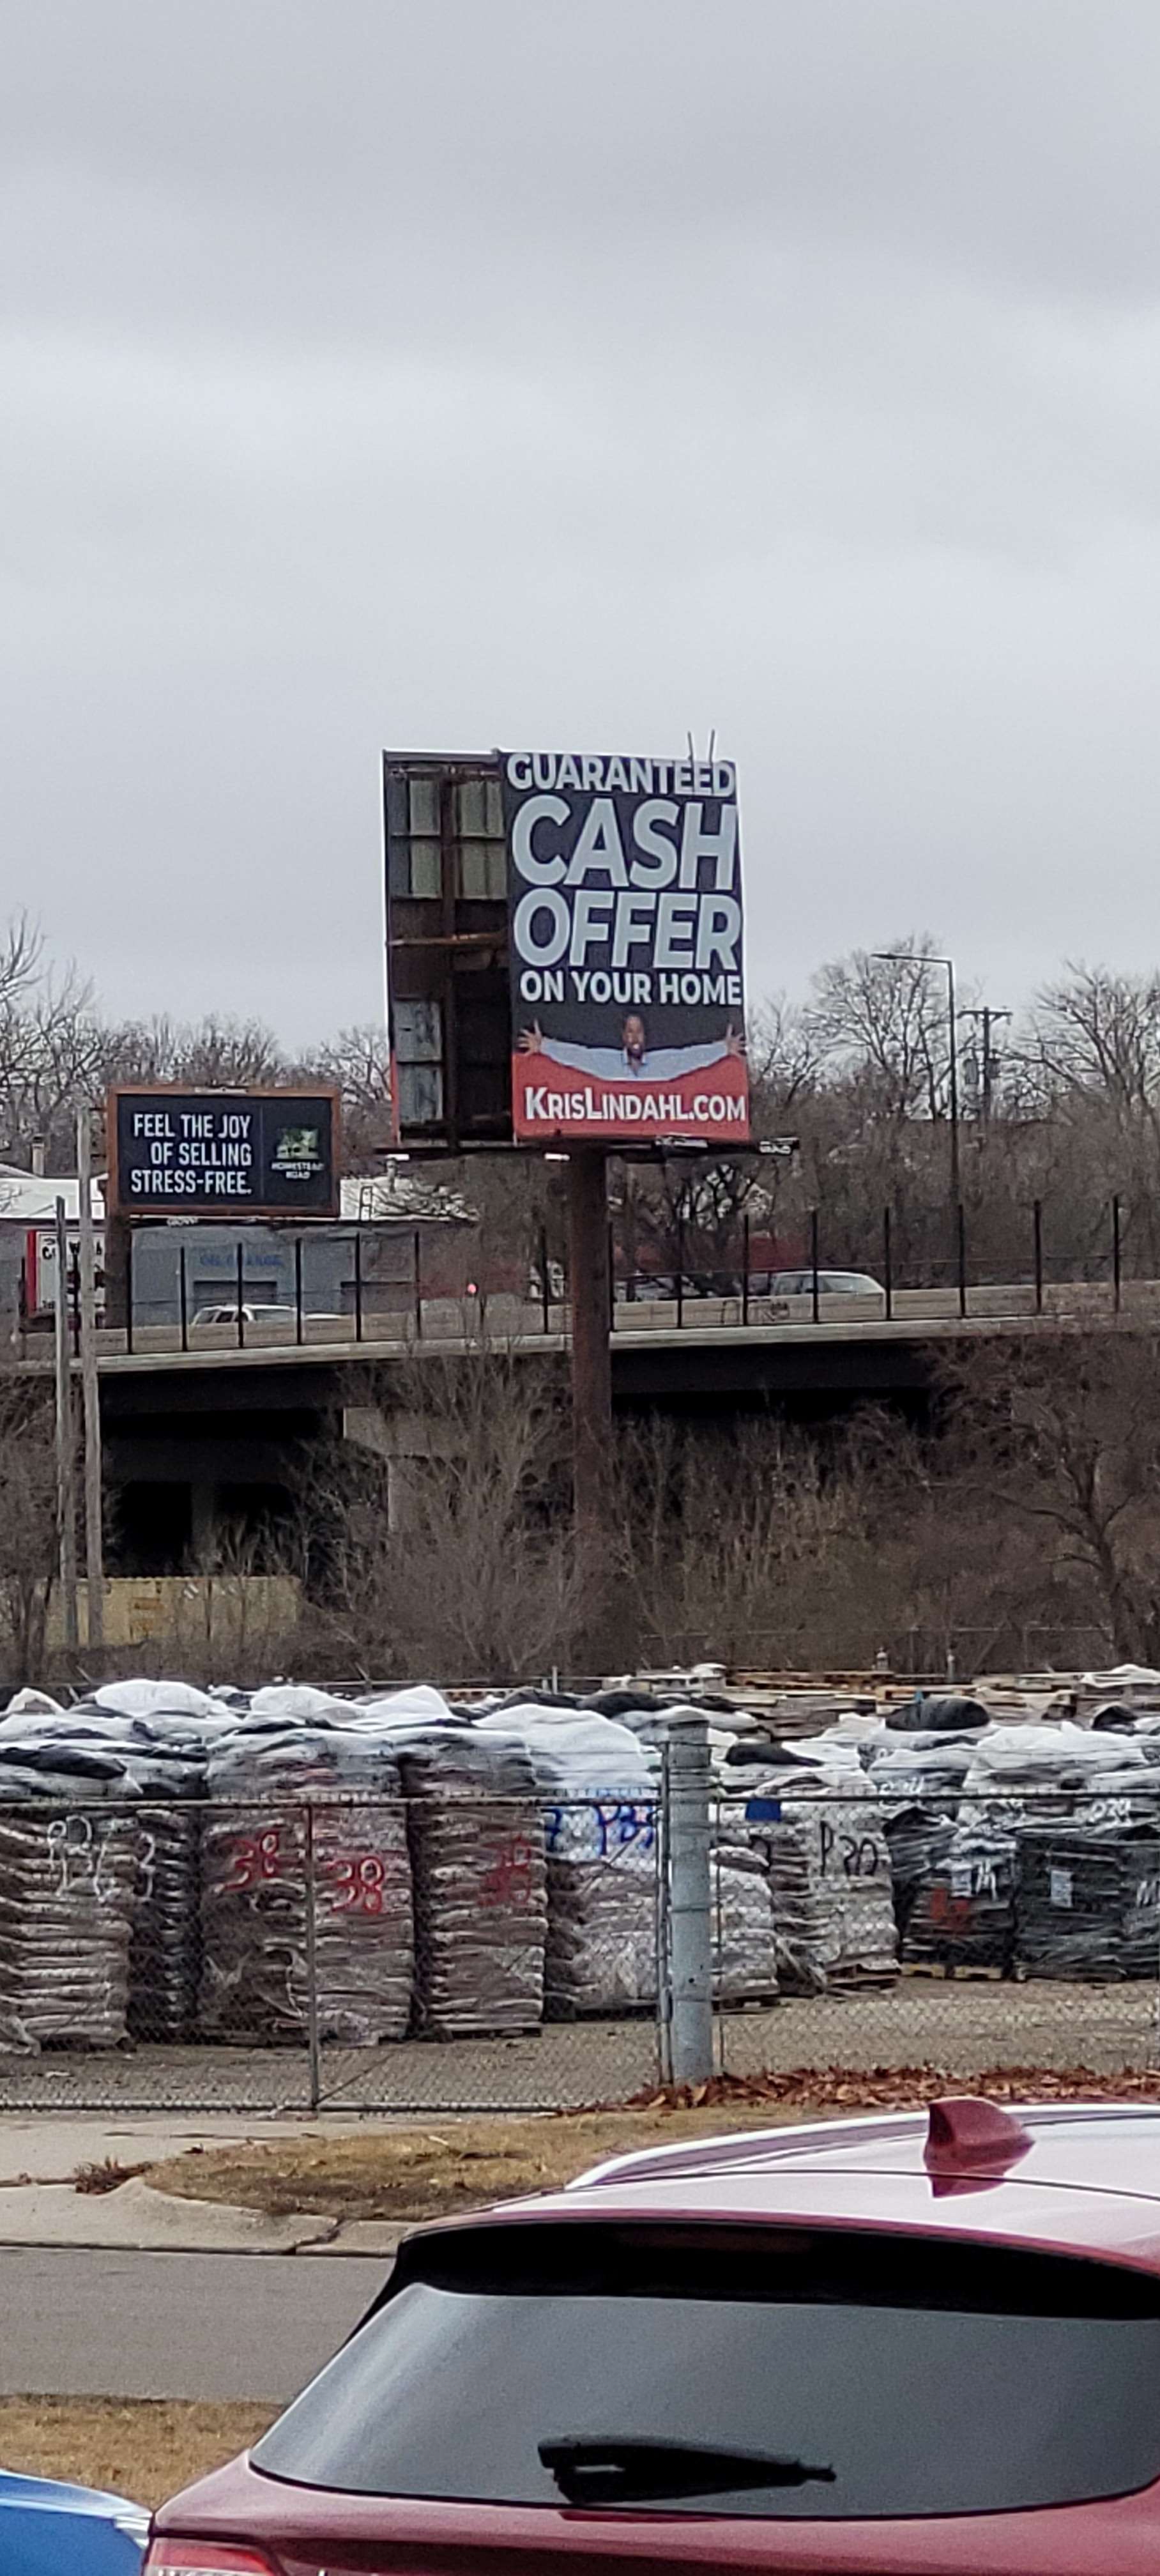 another billboard